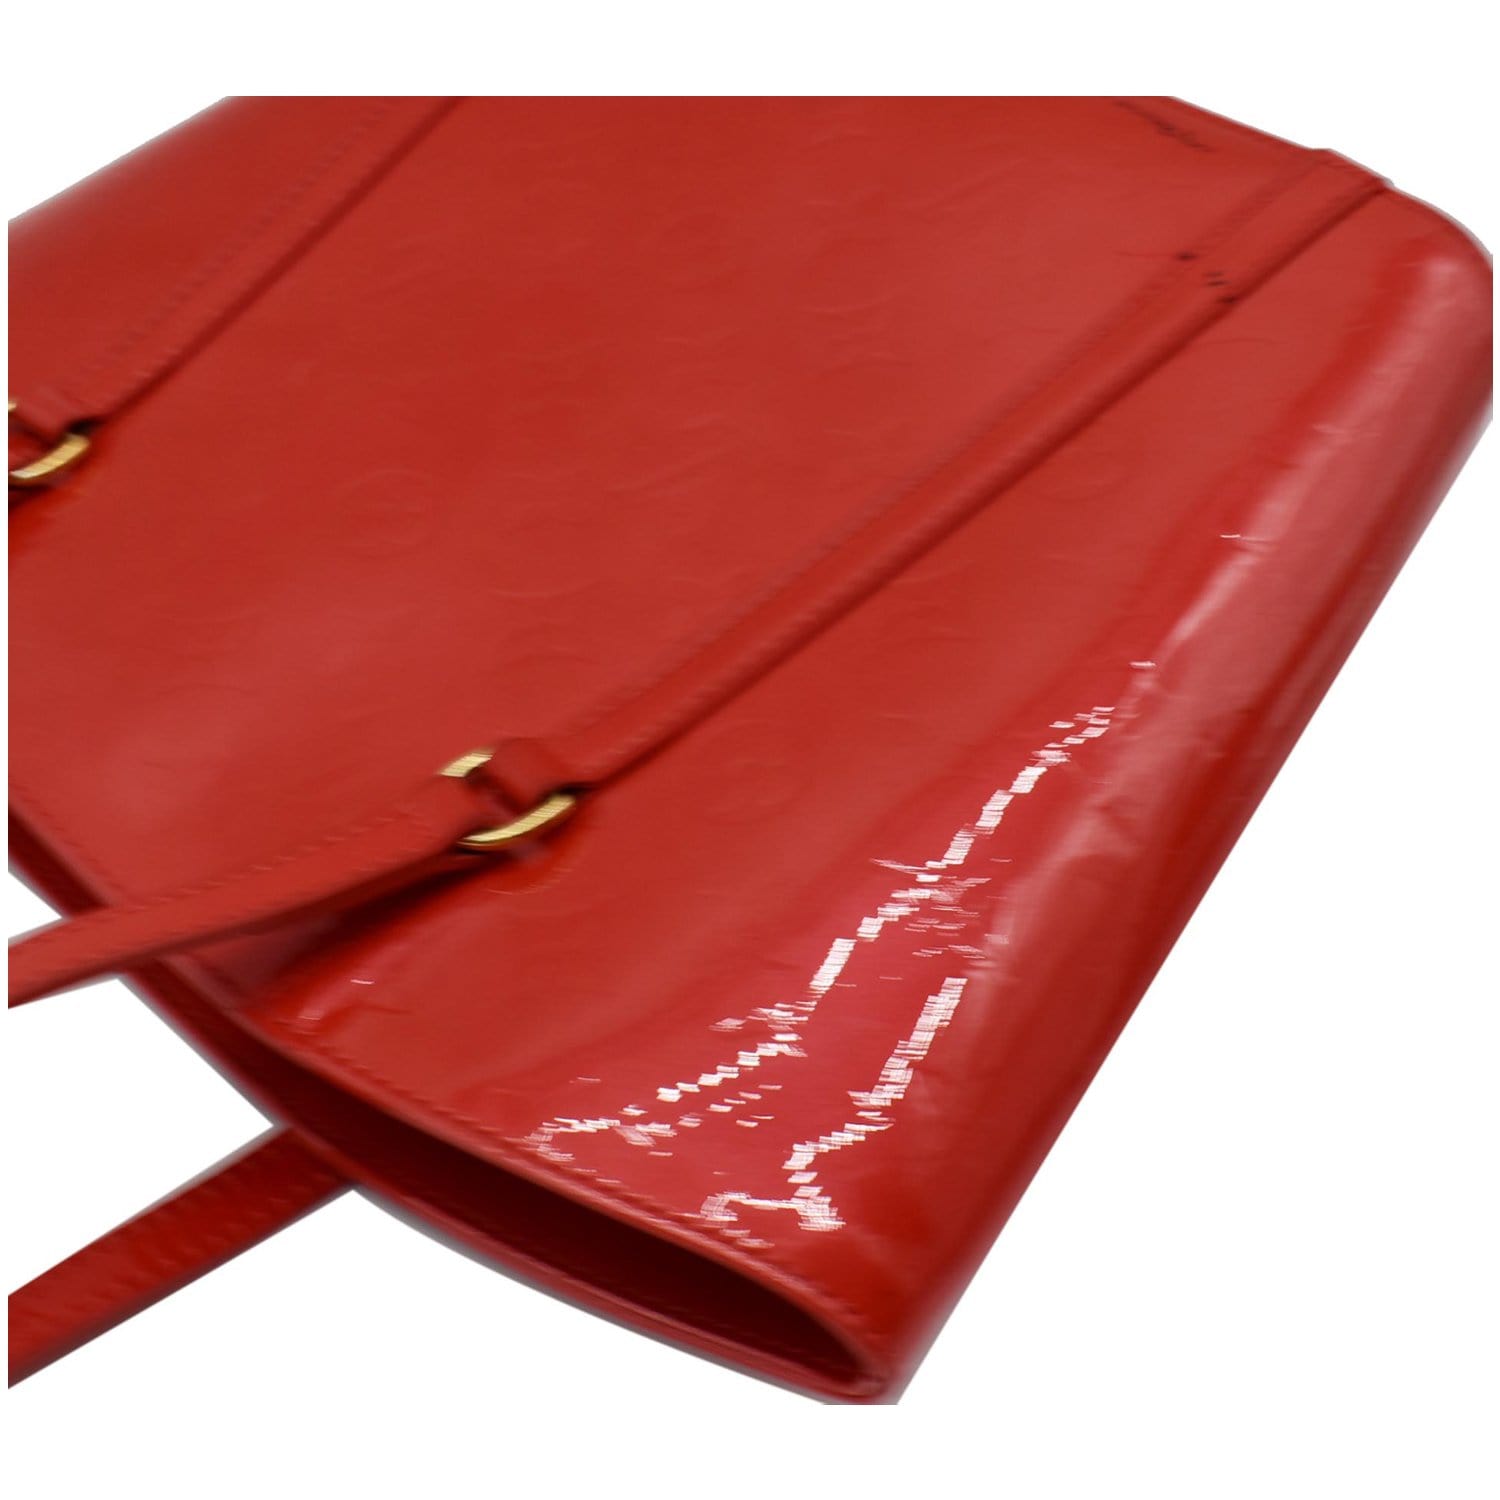 Louis Vuitton Monogram Vernis Reade MM Red Leather Patent leather